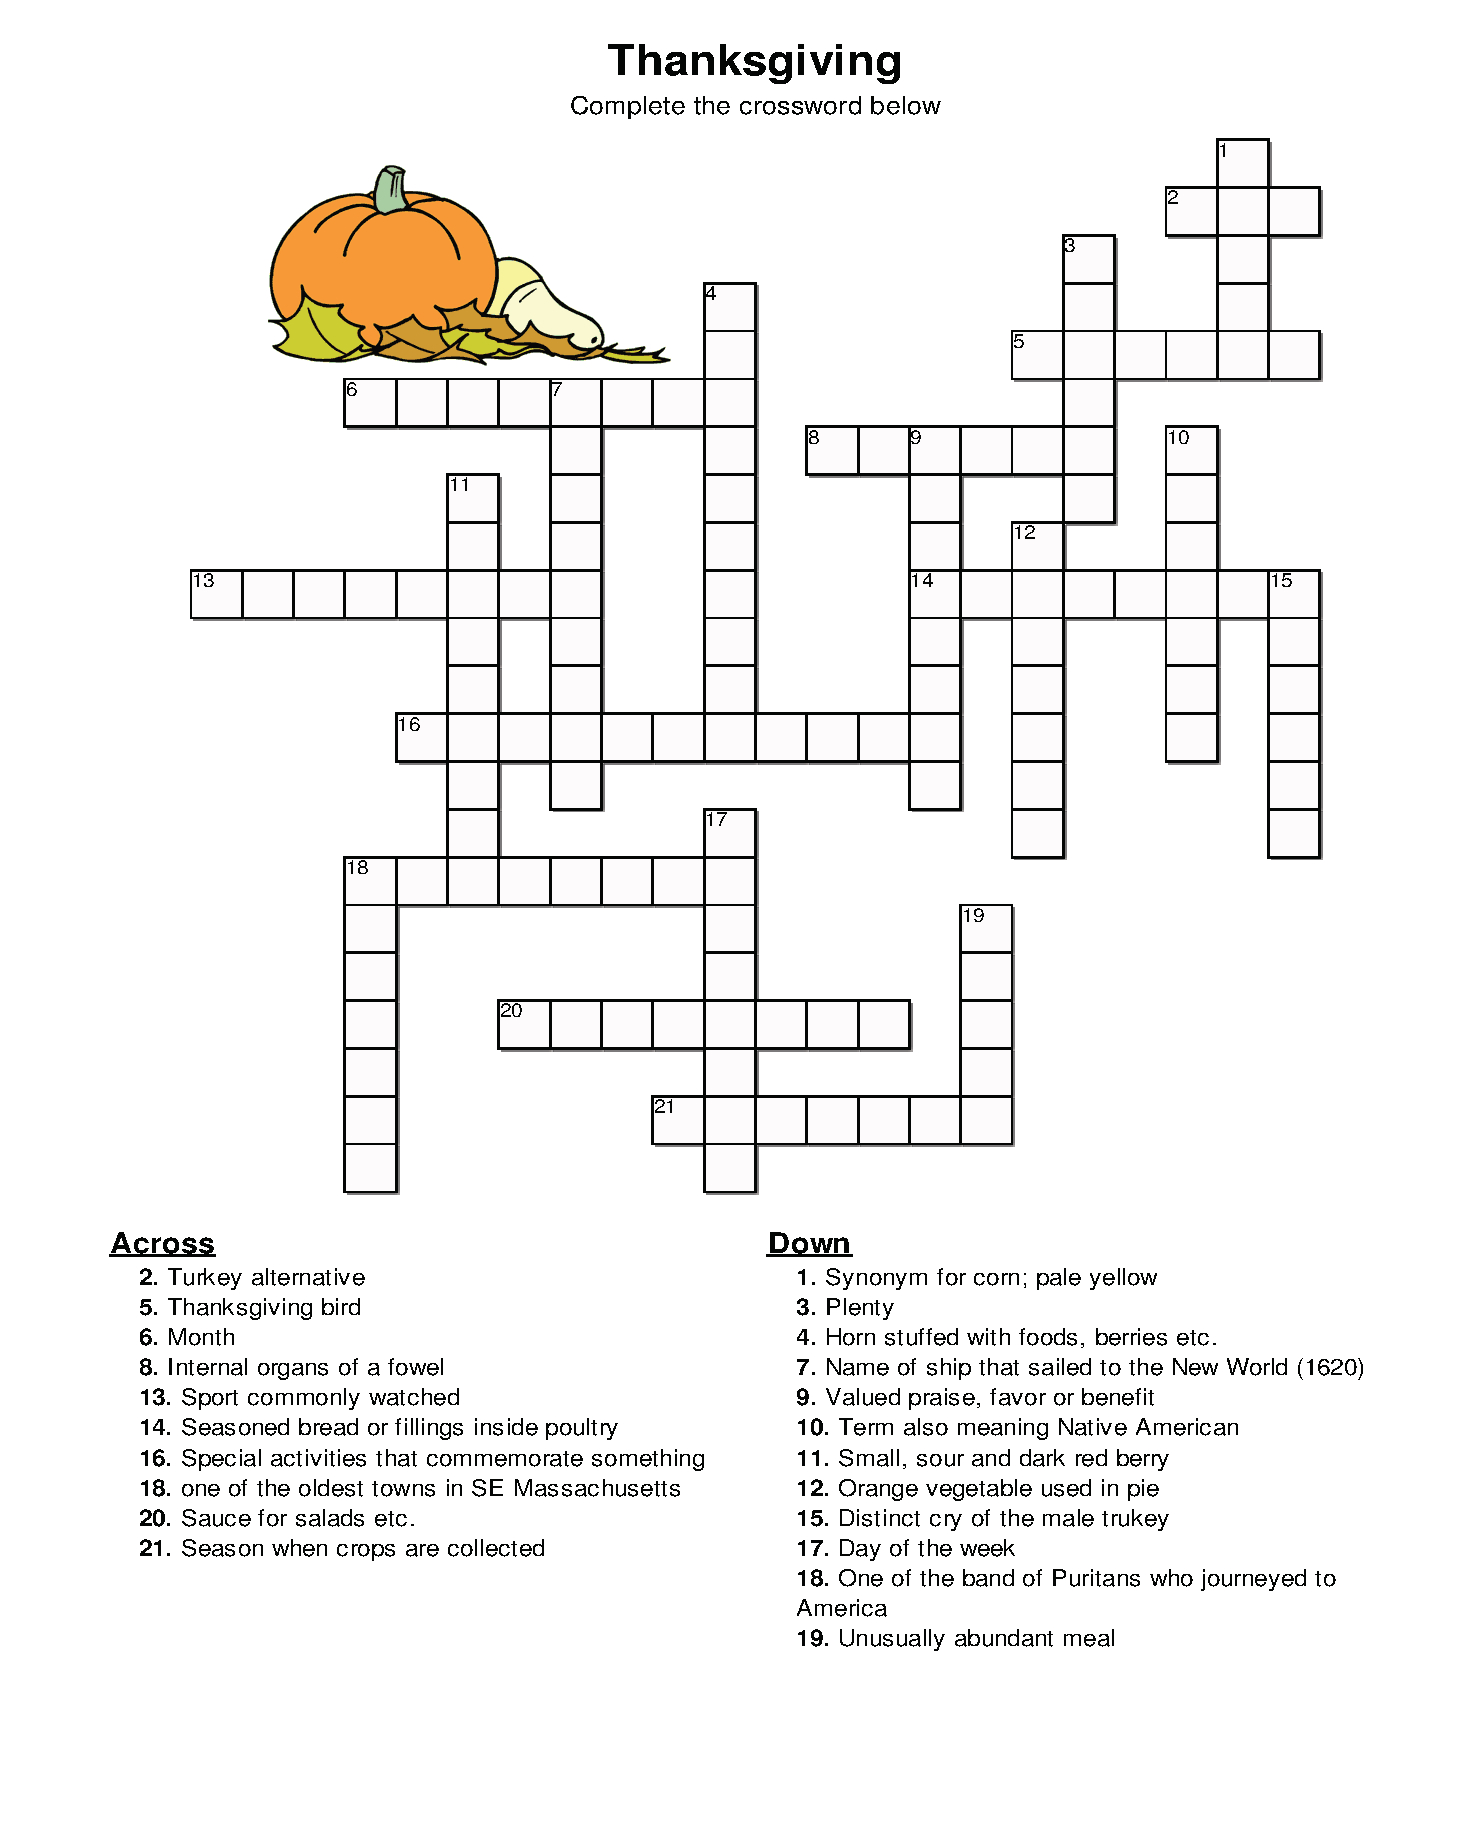 Thanksgiving Crossword Puzzle - Best Coloring Pages For Kids - Printable Crossword Puzzles For Thanksgiving